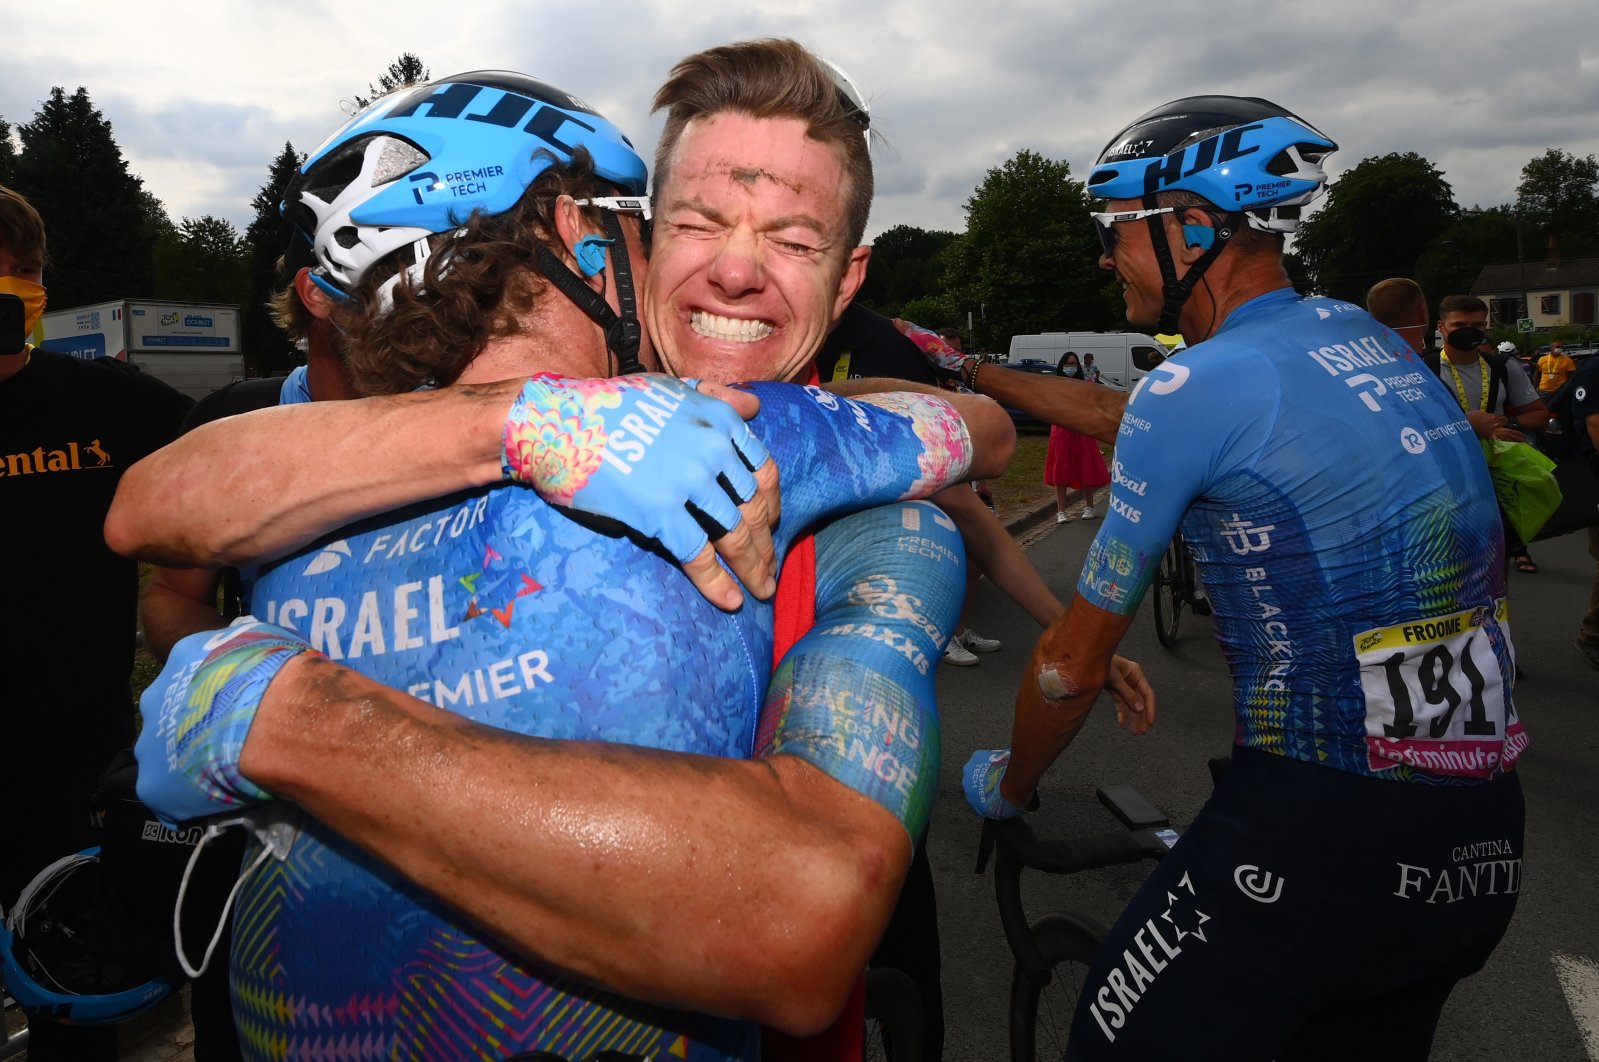 Israel Premier Tech&#039;s Australian rider Simon Clarke (C) celebrates with teammates after winning the 5th stage of the Tour de France 2022, Wallers-Arenberg, France, July 6, 2022. (EPA Photo)